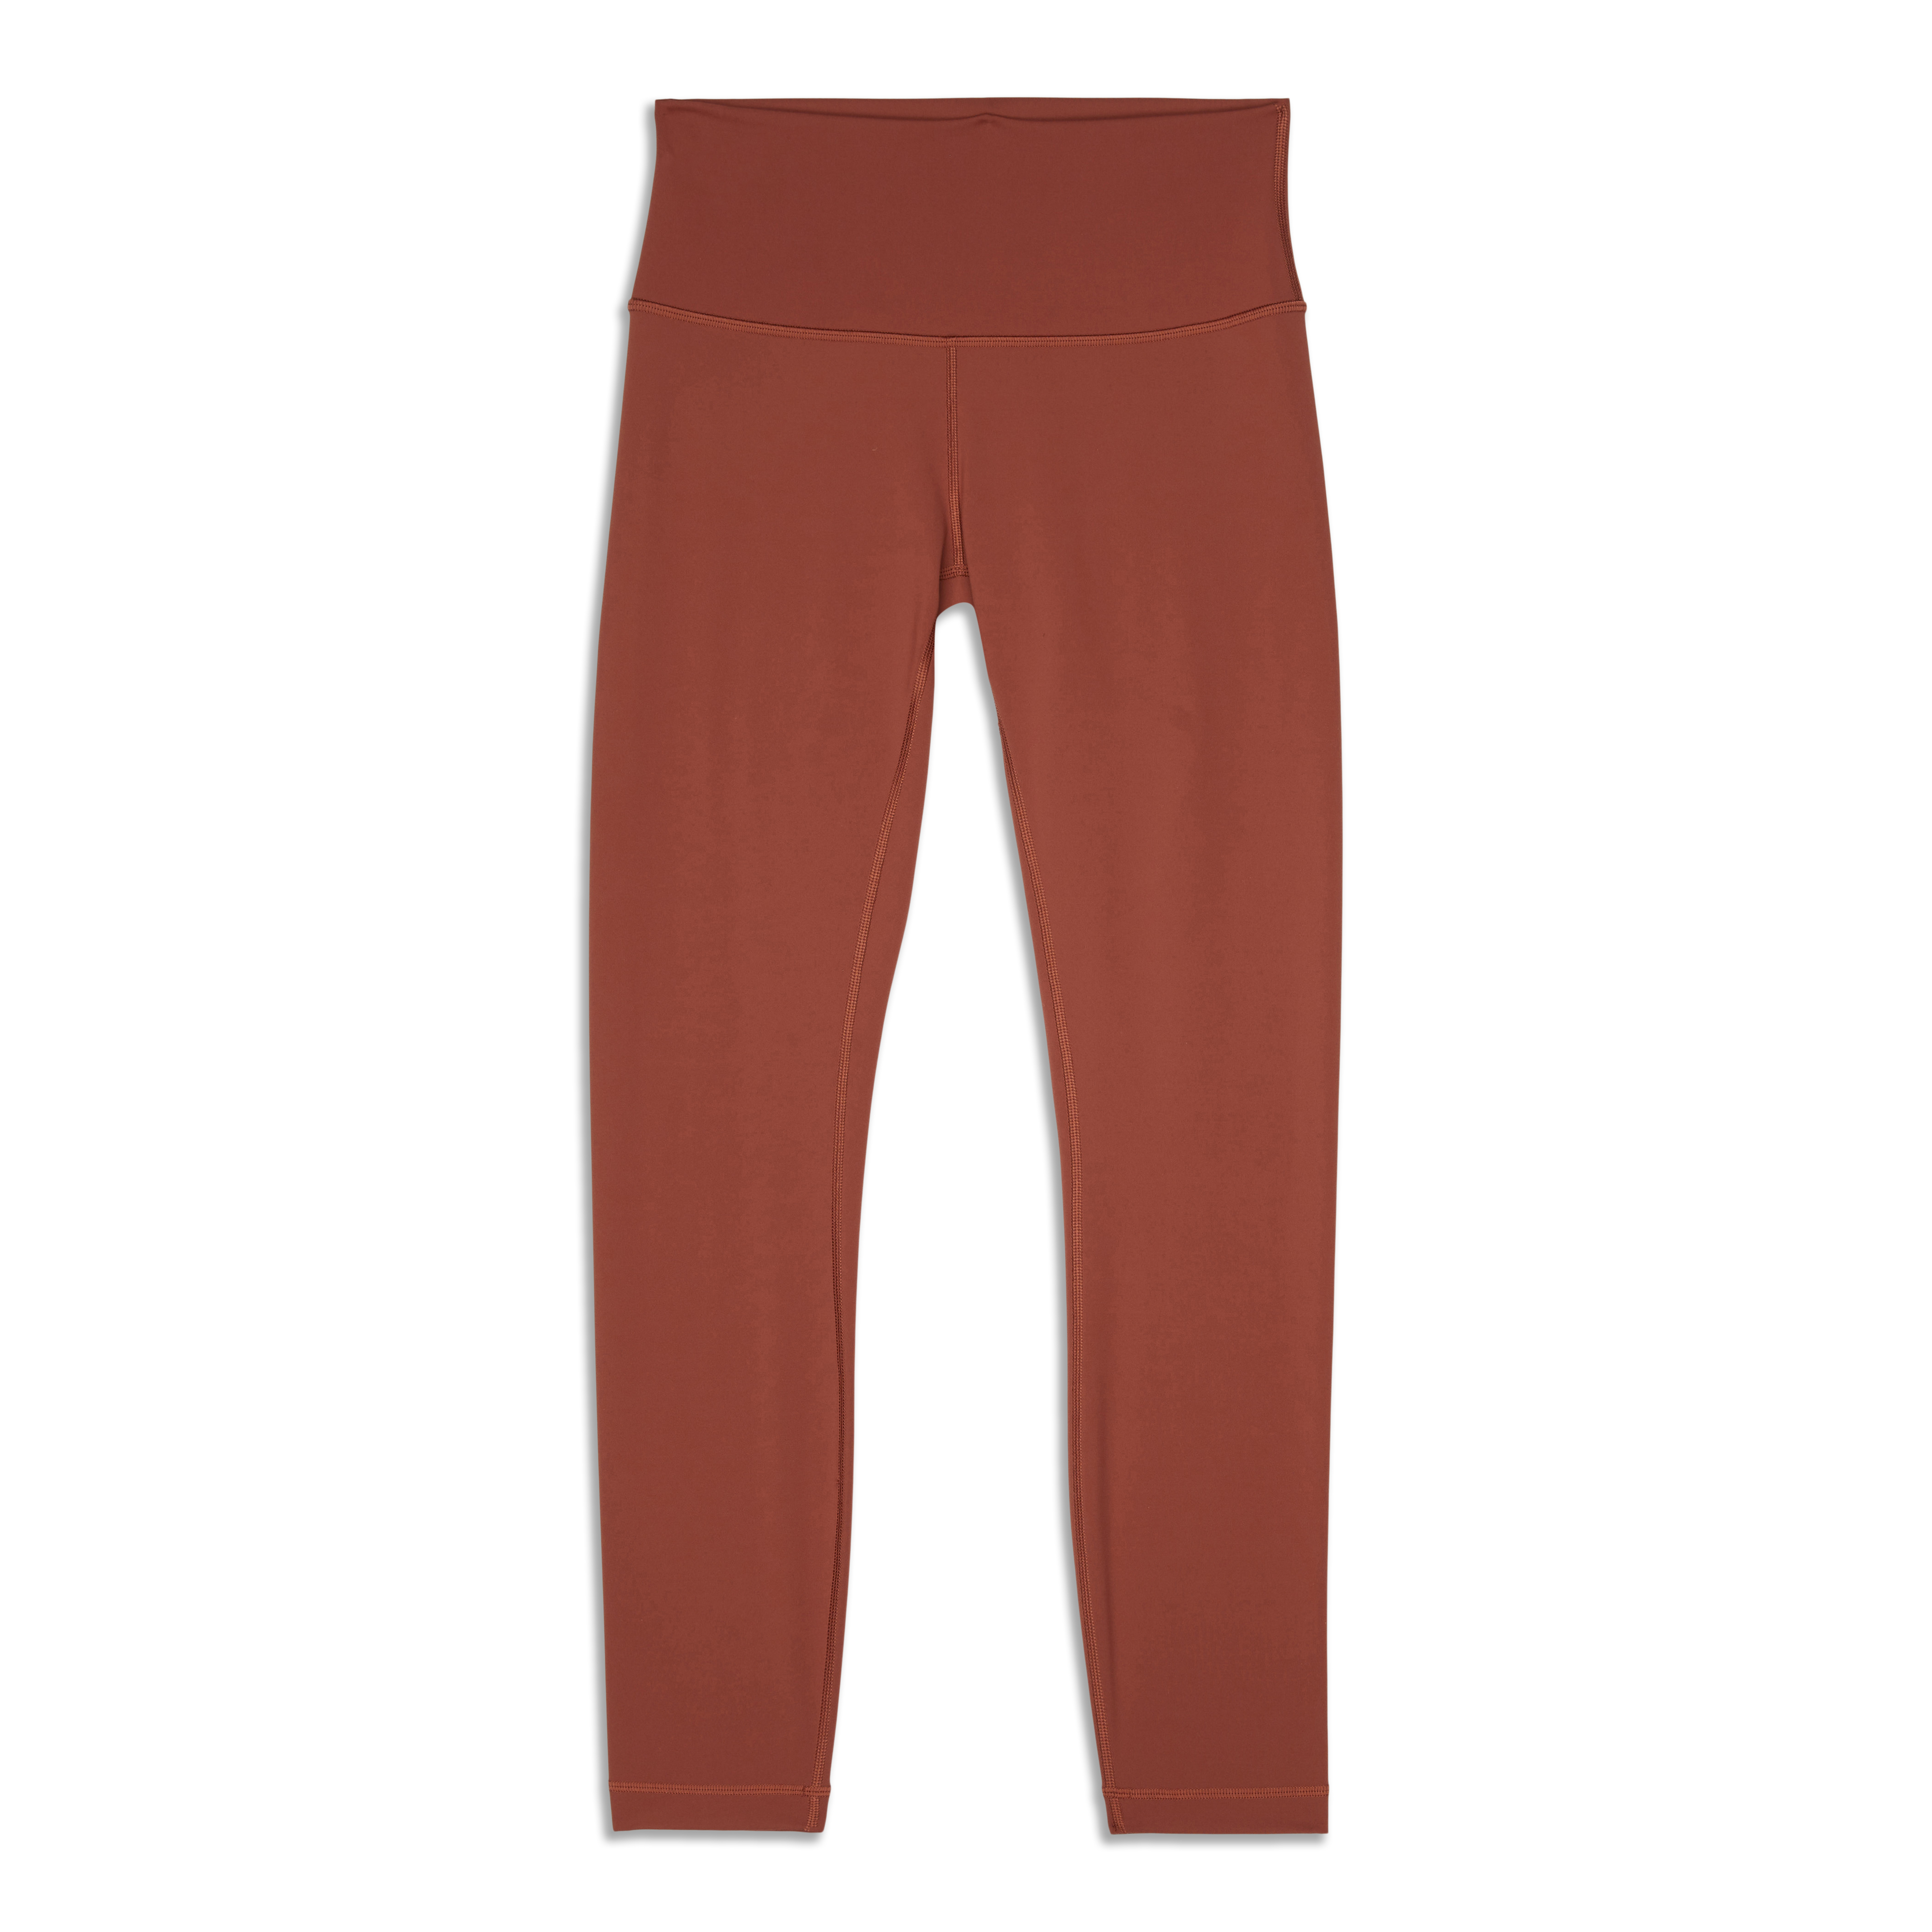 Lululemon Wunder Under Capoeira Multi Color Leggings High Waisted Size 4 -  $52 (59% Off Retail) - From Marissa